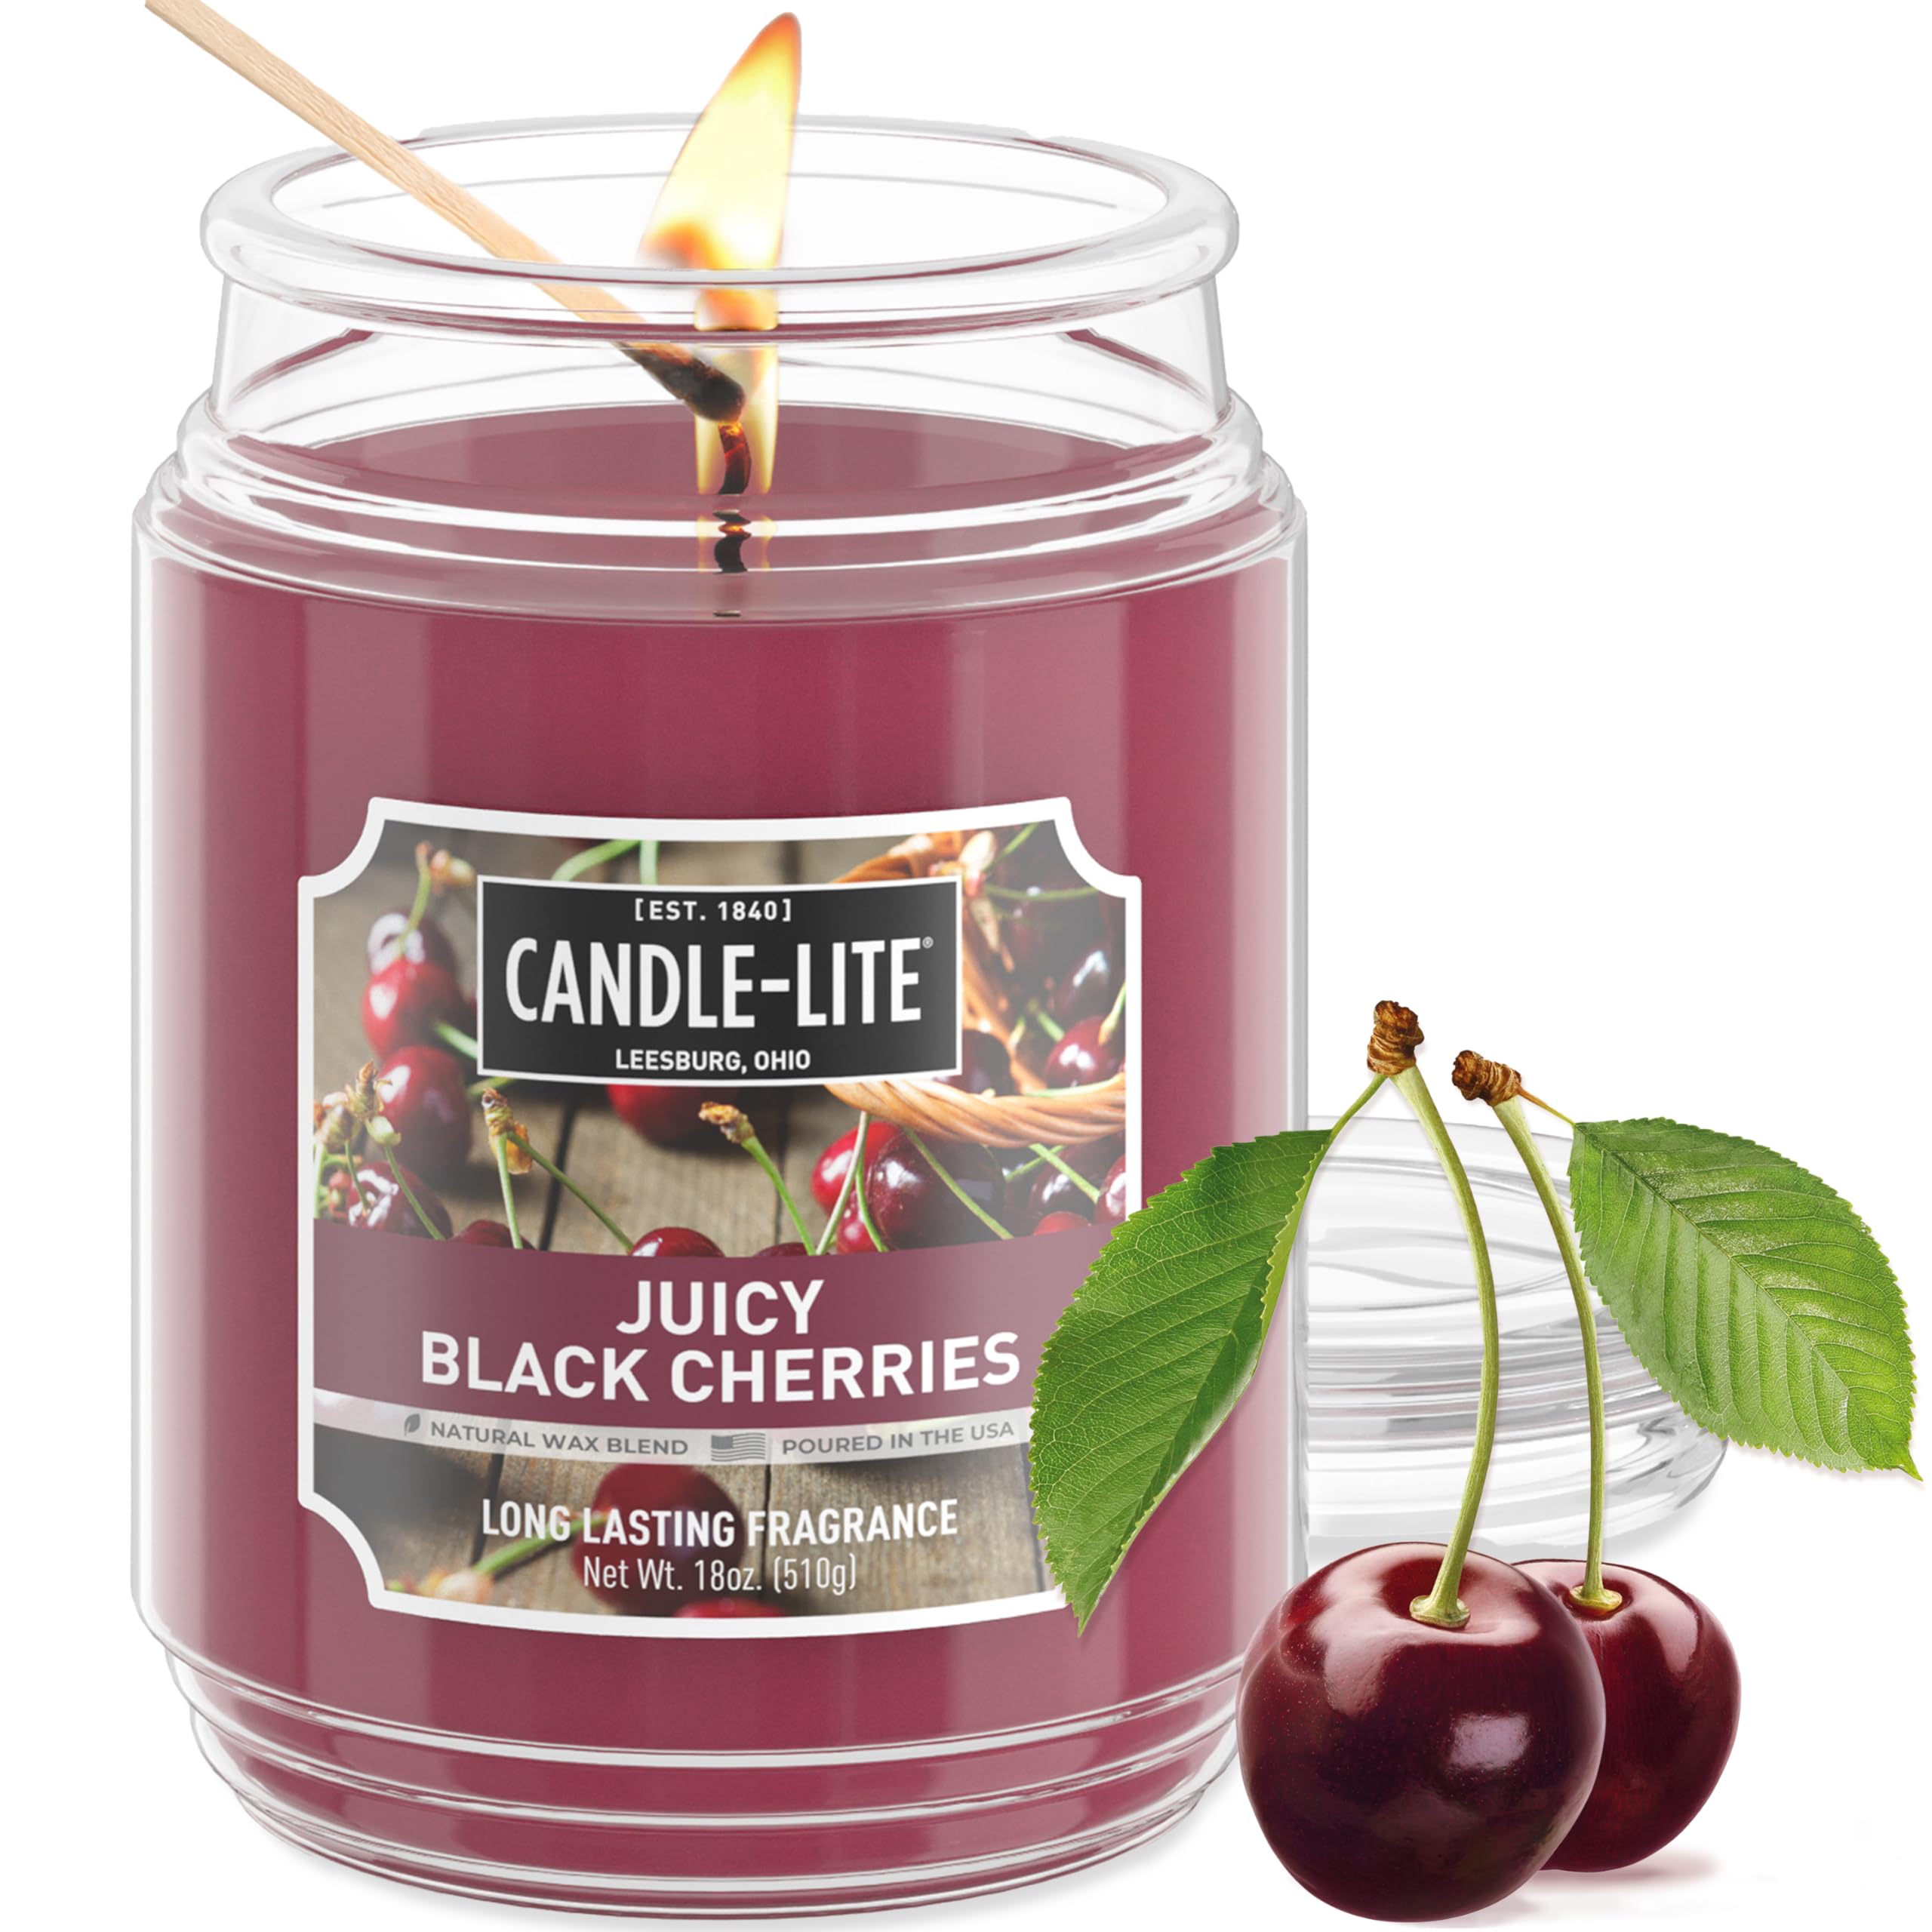 Amazon.com: Candle-lite Scented Juicy Black Cherries Fragrance, One 18 oz. Single-Wick Aromatherapy Candle with 110 Hours of Burn Time, Dark Red Color : Home & Kitchen $5.99